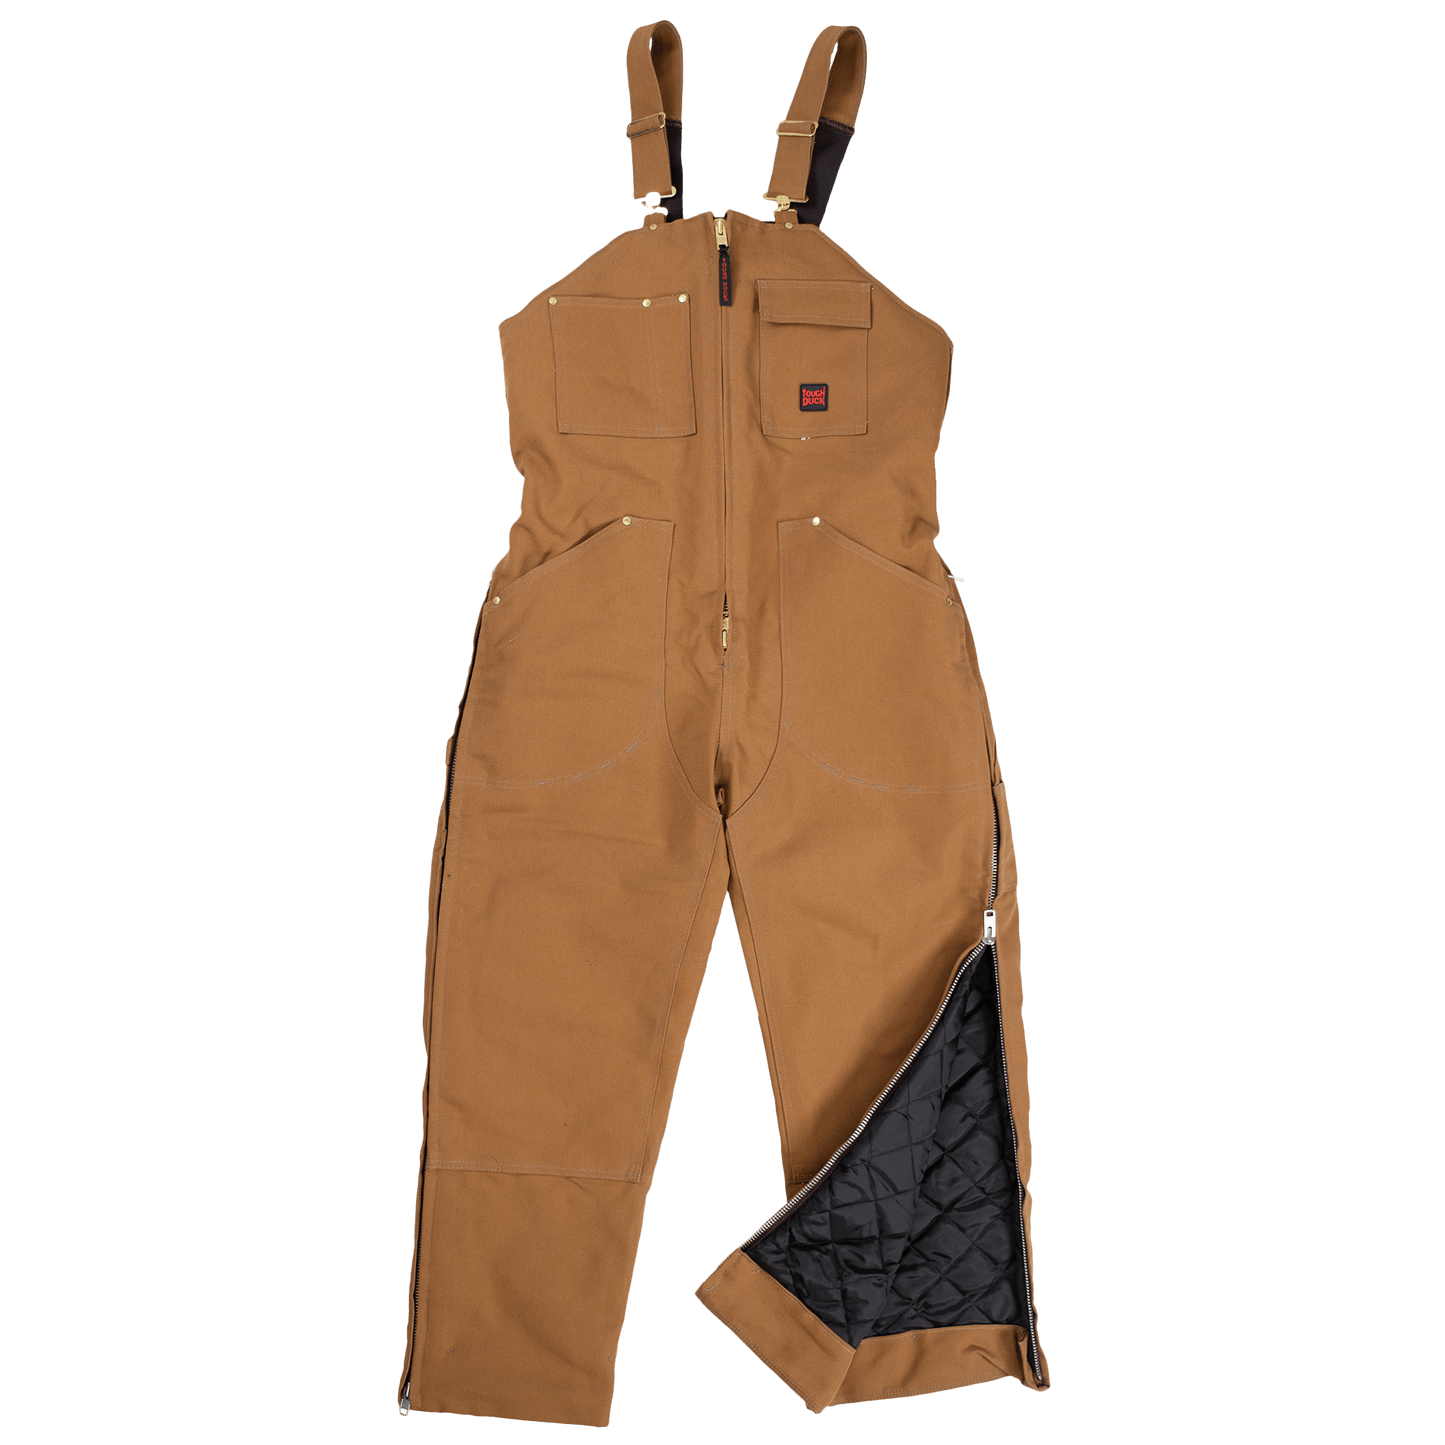 Tough Duck Insulated Bib Overalls - 7537 - Brown